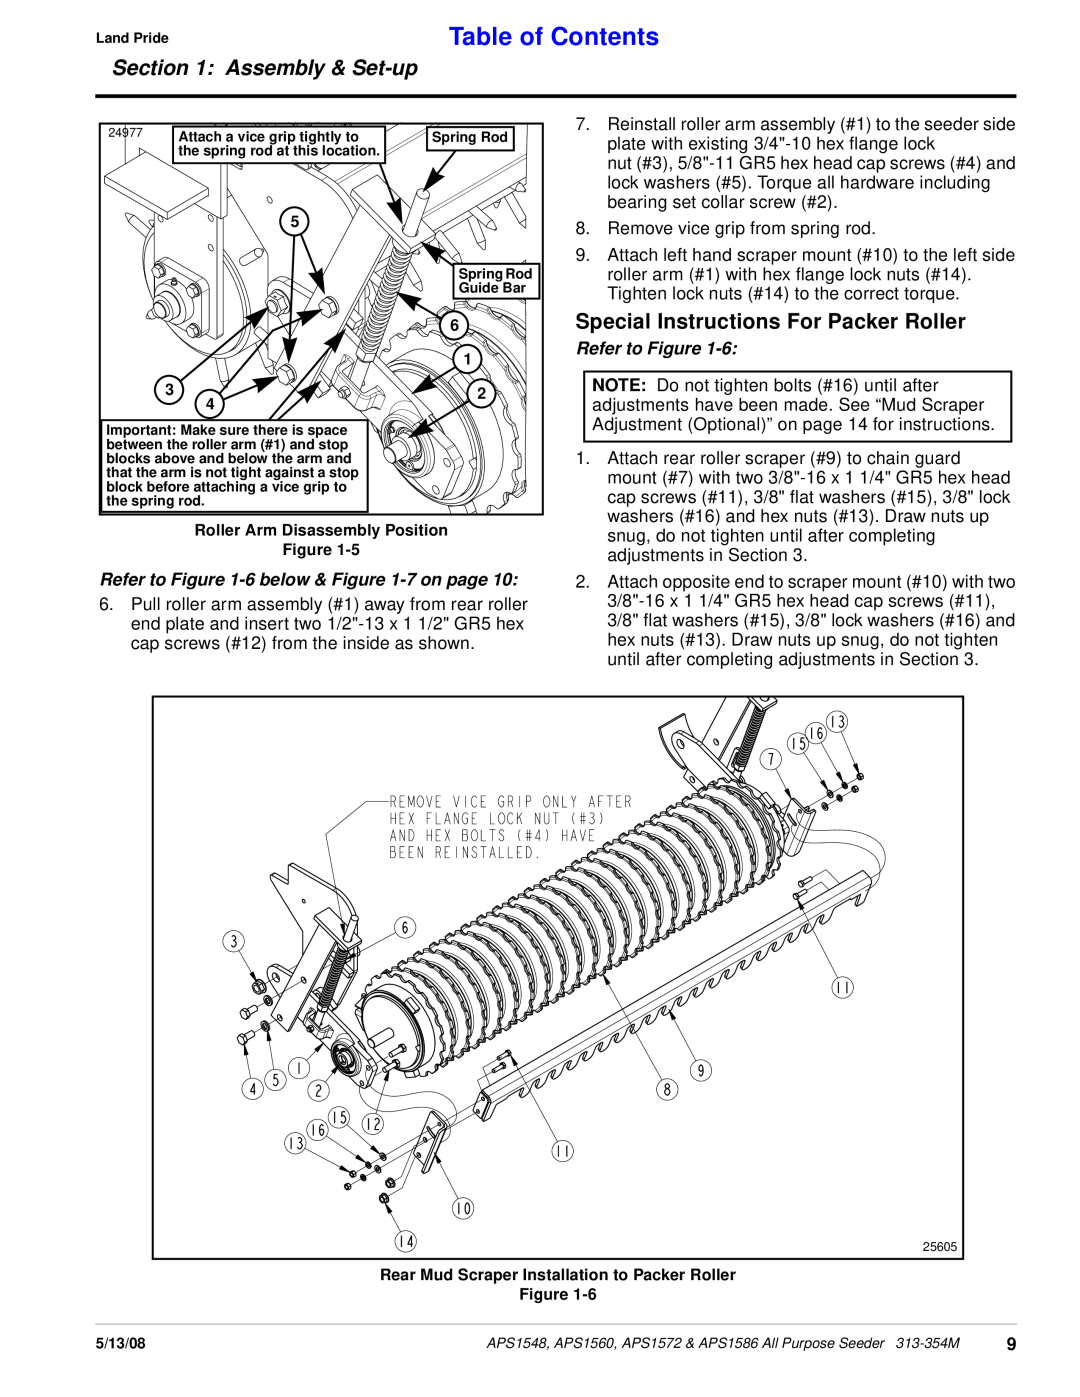 Land Pride APS1548, APS1560 manual Special Instructions For Packer Roller, Refer to -6below & -7on page, Table of Contents 